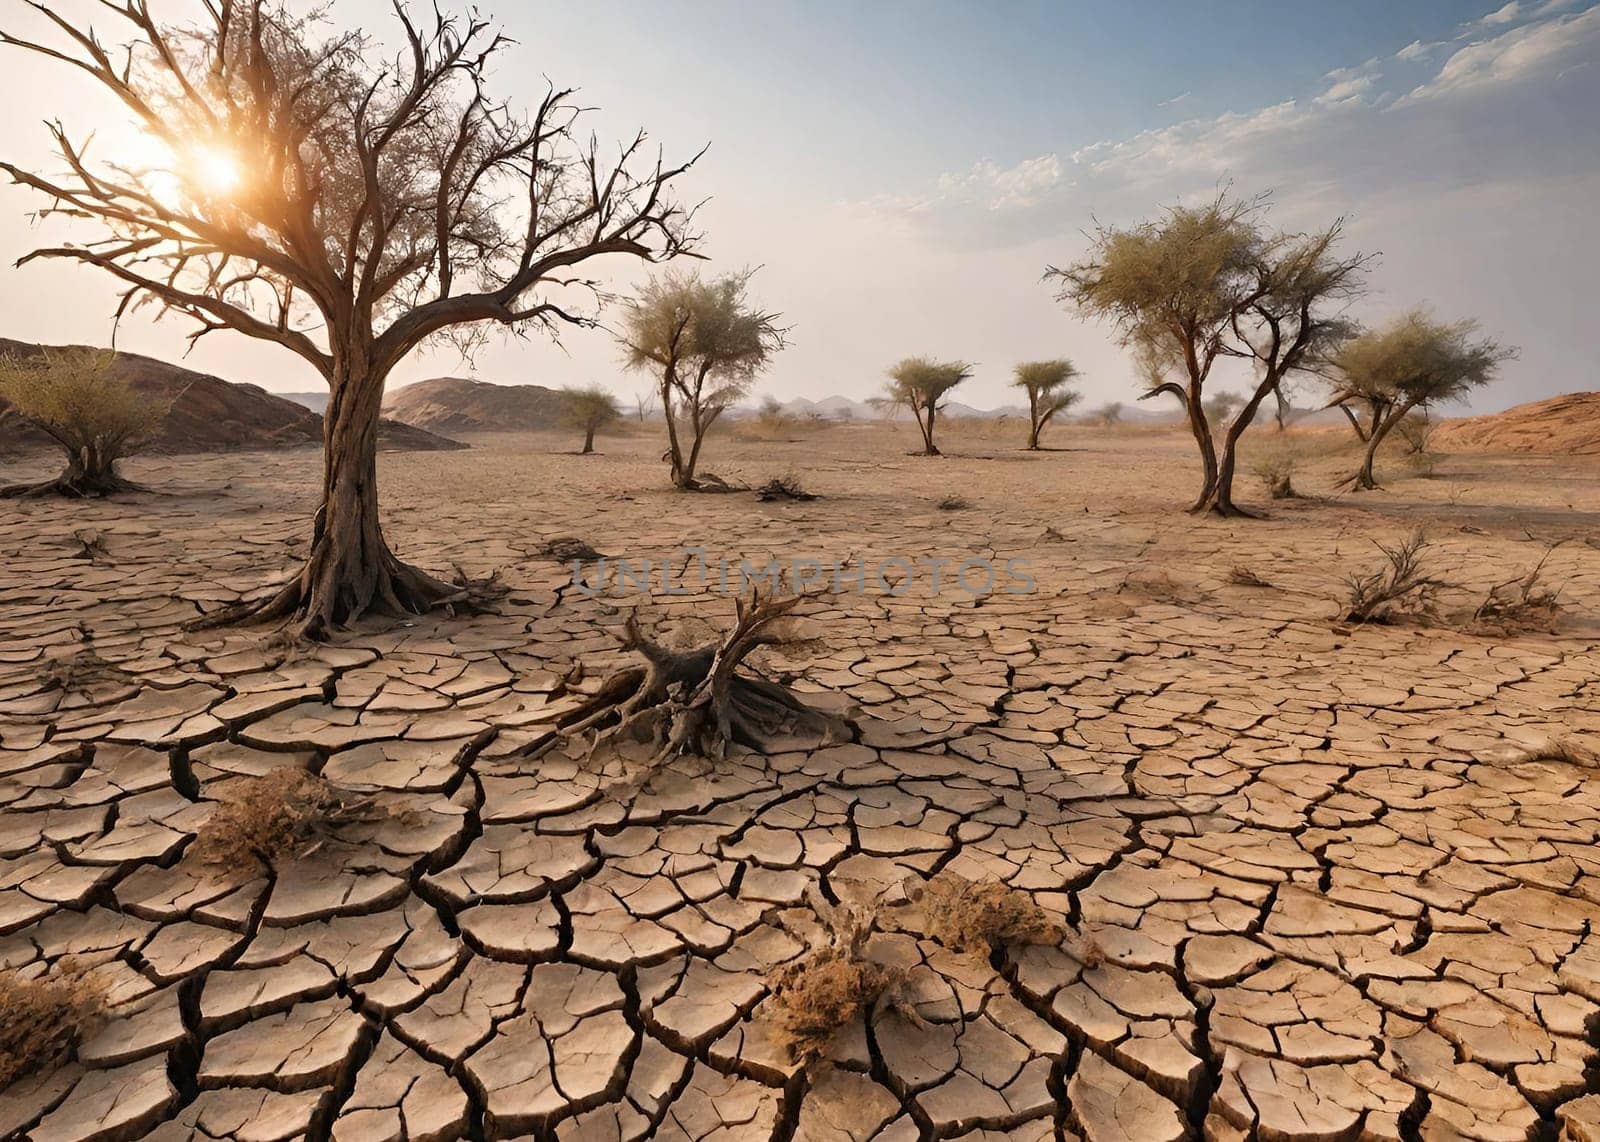 The Thirst of the Earth. The Increasing Danger of Global Warming and Drought. The Reality of Climate Change. Rising Dangers with Global Warming and Drought, and the Struggle to Cope with the Earth's Thirst.